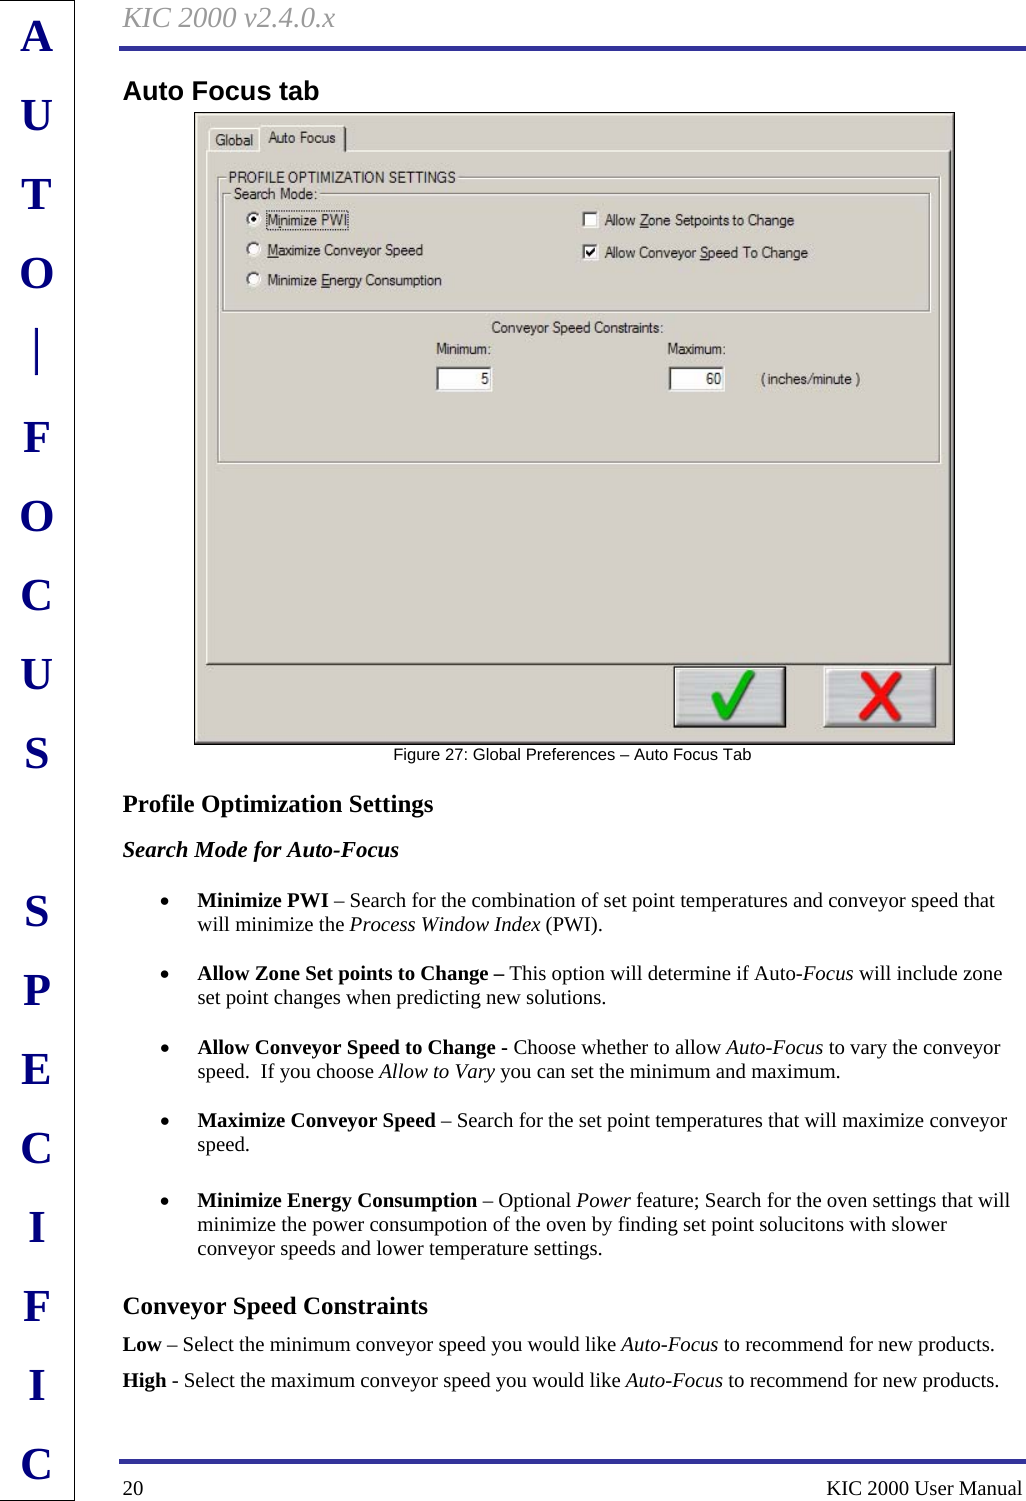 KIC 2000 v2.4.0.x 20    KIC 2000 User Manual Auto Focus tab    Figure 27: Global Preferences – Auto Focus Tab Profile Optimization Settings Search Mode for Auto-Focus  • Minimize PWI – Search for the combination of set point temperatures and conveyor speed that will minimize the Process Window Index (PWI).  • Allow Zone Set points to Change – This option will determine if Auto-Focus will include zone set point changes when predicting new solutions.  • Allow Conveyor Speed to Change - Choose whether to allow Auto-Focus to vary the conveyor speed.  If you choose Allow to Vary you can set the minimum and maximum.  • Maximize Conveyor Speed – Search for the set point temperatures that will maximize conveyor speed.  • Minimize Energy Consumption – Optional Power feature; Search for the oven settings that will minimize the power consumpotion of the oven by finding set point solucitons with slower conveyor speeds and lower temperature settings. Conveyor Speed Constraints Low – Select the minimum conveyor speed you would like Auto-Focus to recommend for new products. High - Select the maximum conveyor speed you would like Auto-Focus to recommend for new products.  AUTO⎪FOCUS  SPECIFIC 